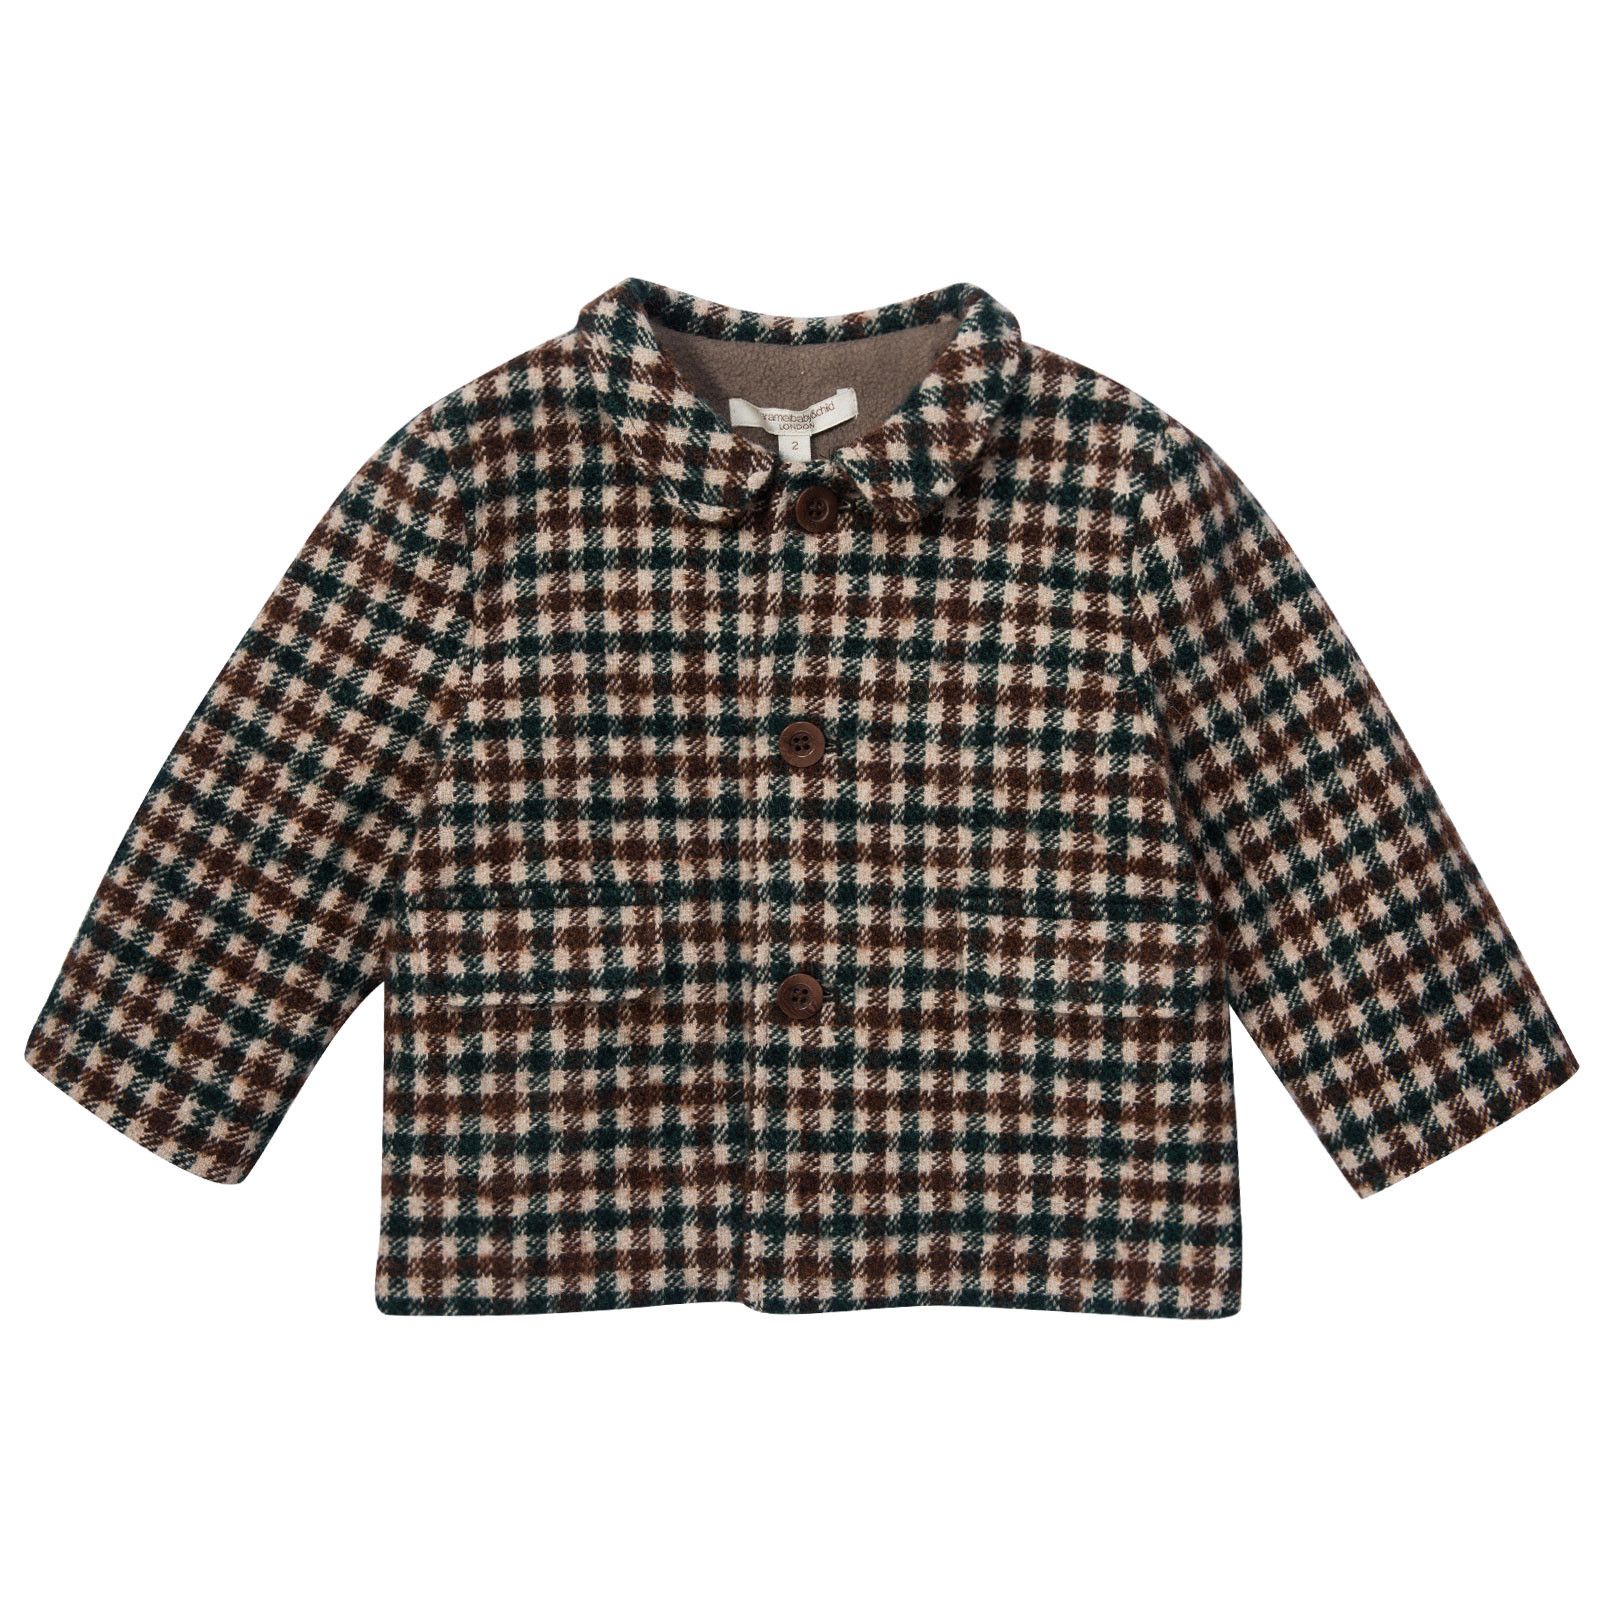 Baby Brown&Green Check Wool Coat With Flap Pockets - CÉMAROSE | Children's Fashion Store - 1